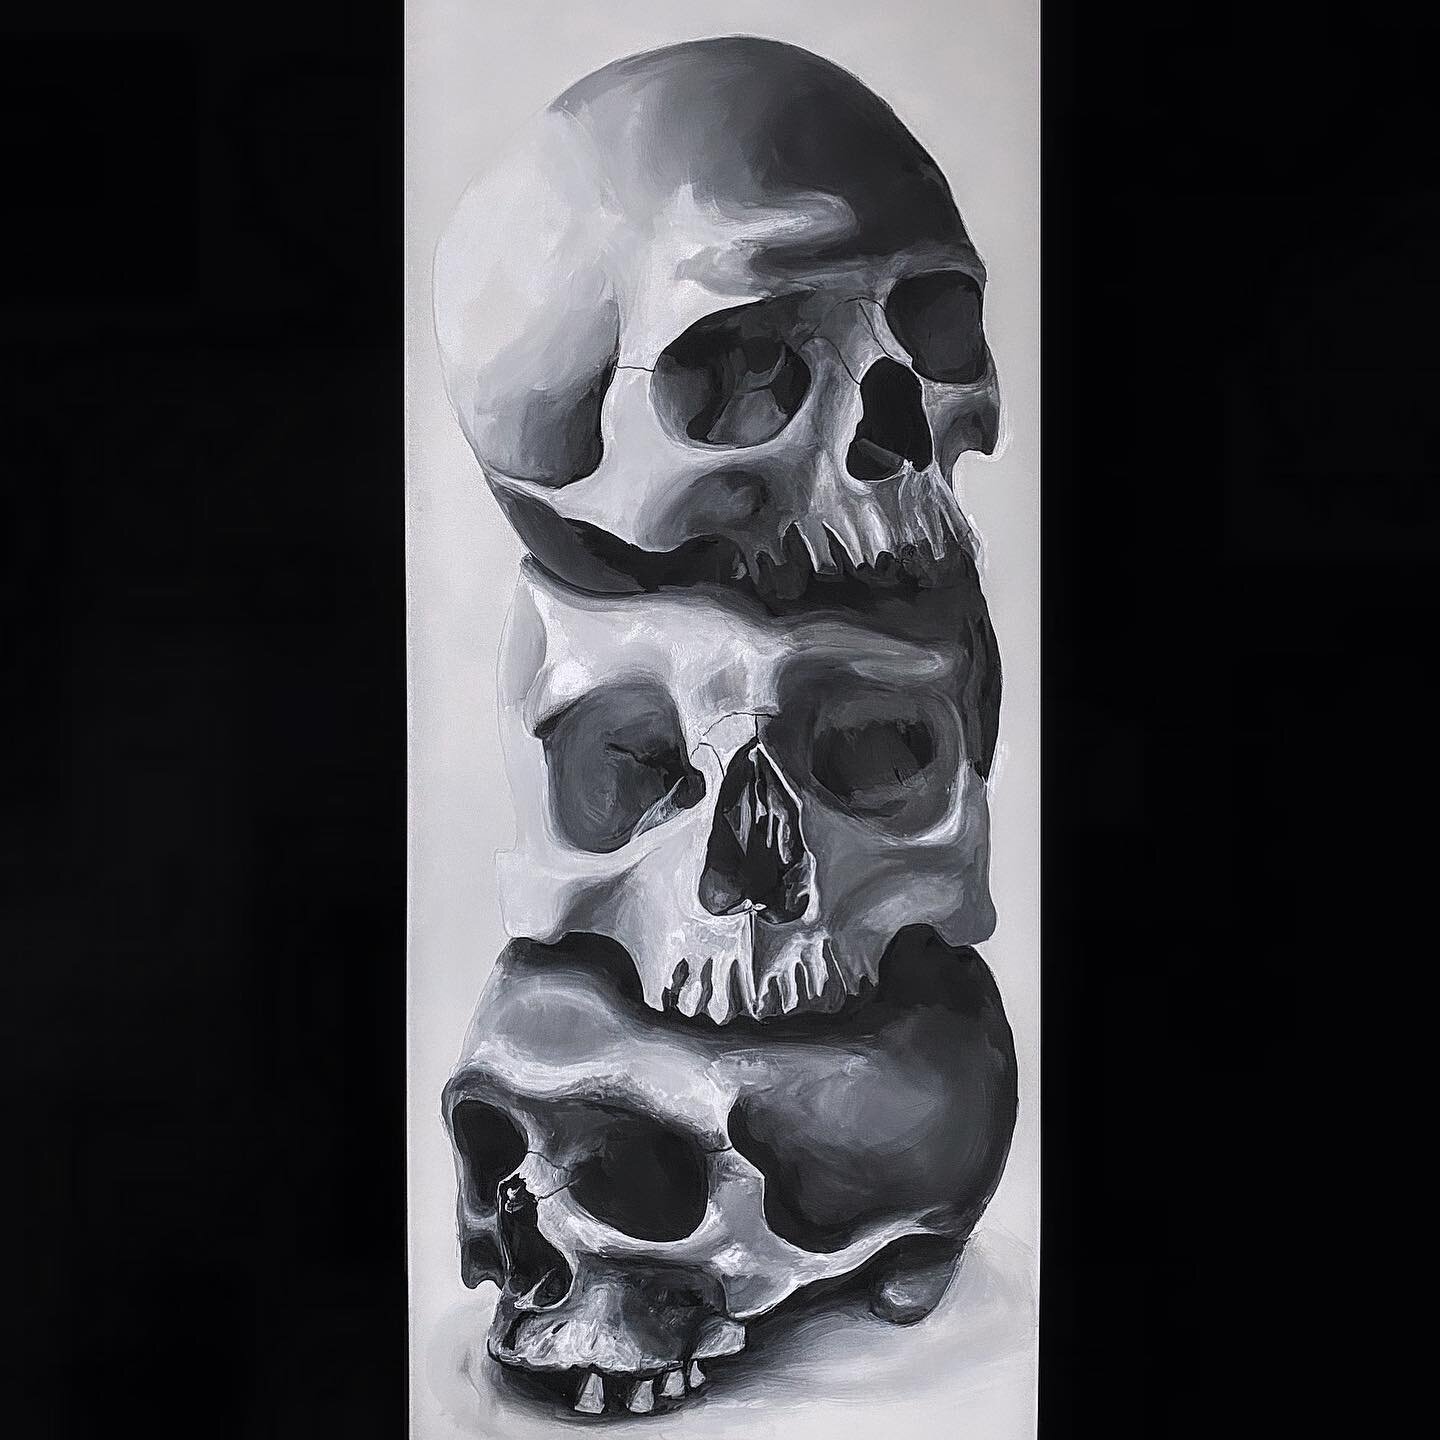 Ever wanted a HUGE painting for under 100$? This five footer will be at the #under100artshow week one🤘🏻 Dec 7-10th! Tickets on sale now! Link in bio!  @artspot.yyc 
-
-
-
#art #painting #lillixart #skullpainting #hugepainting #largepainting #artwor